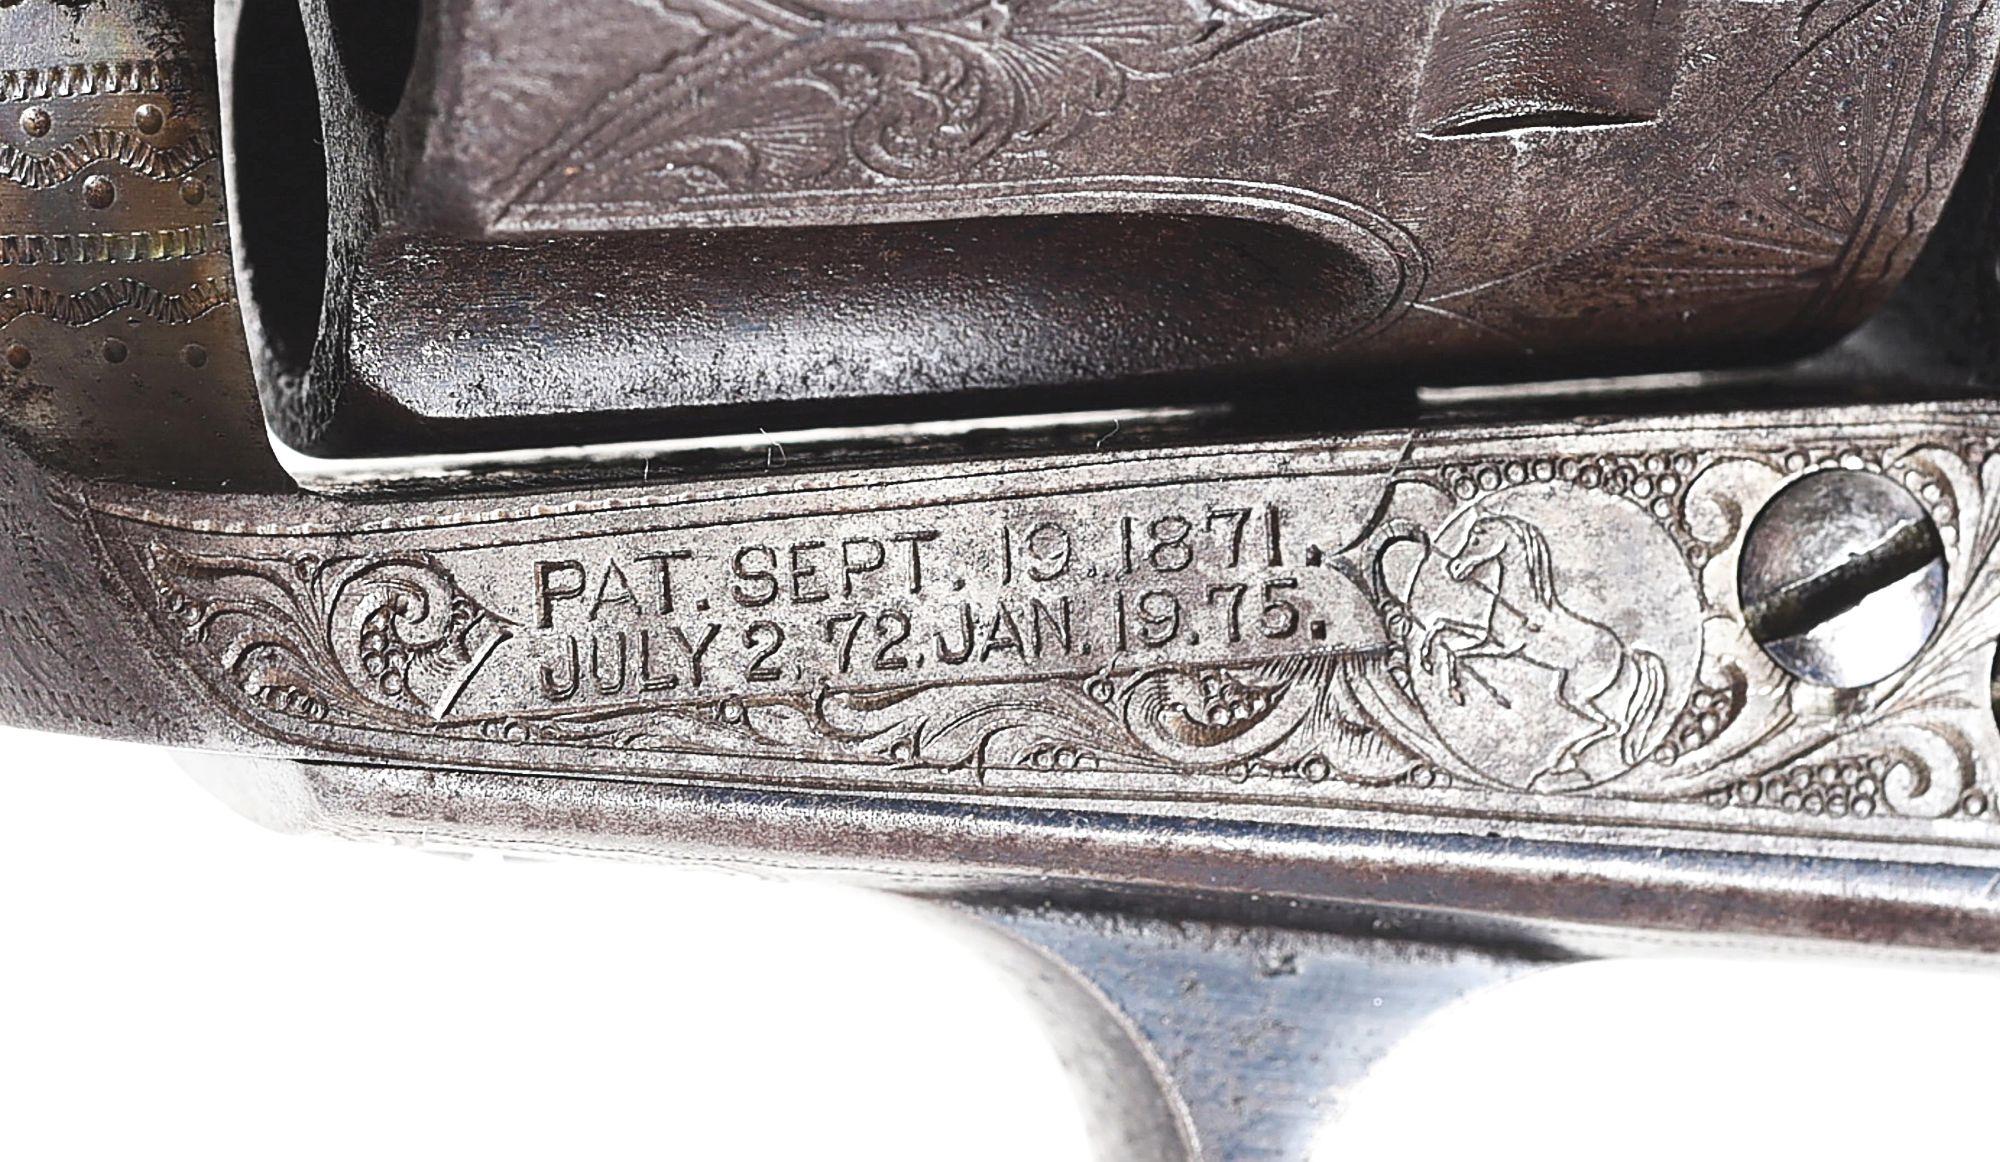 (A) FACTORY ENGRAVED COLT SINGLE ACTION FRONTIER SIX SHOOTER REVOLVER WITH CASE.